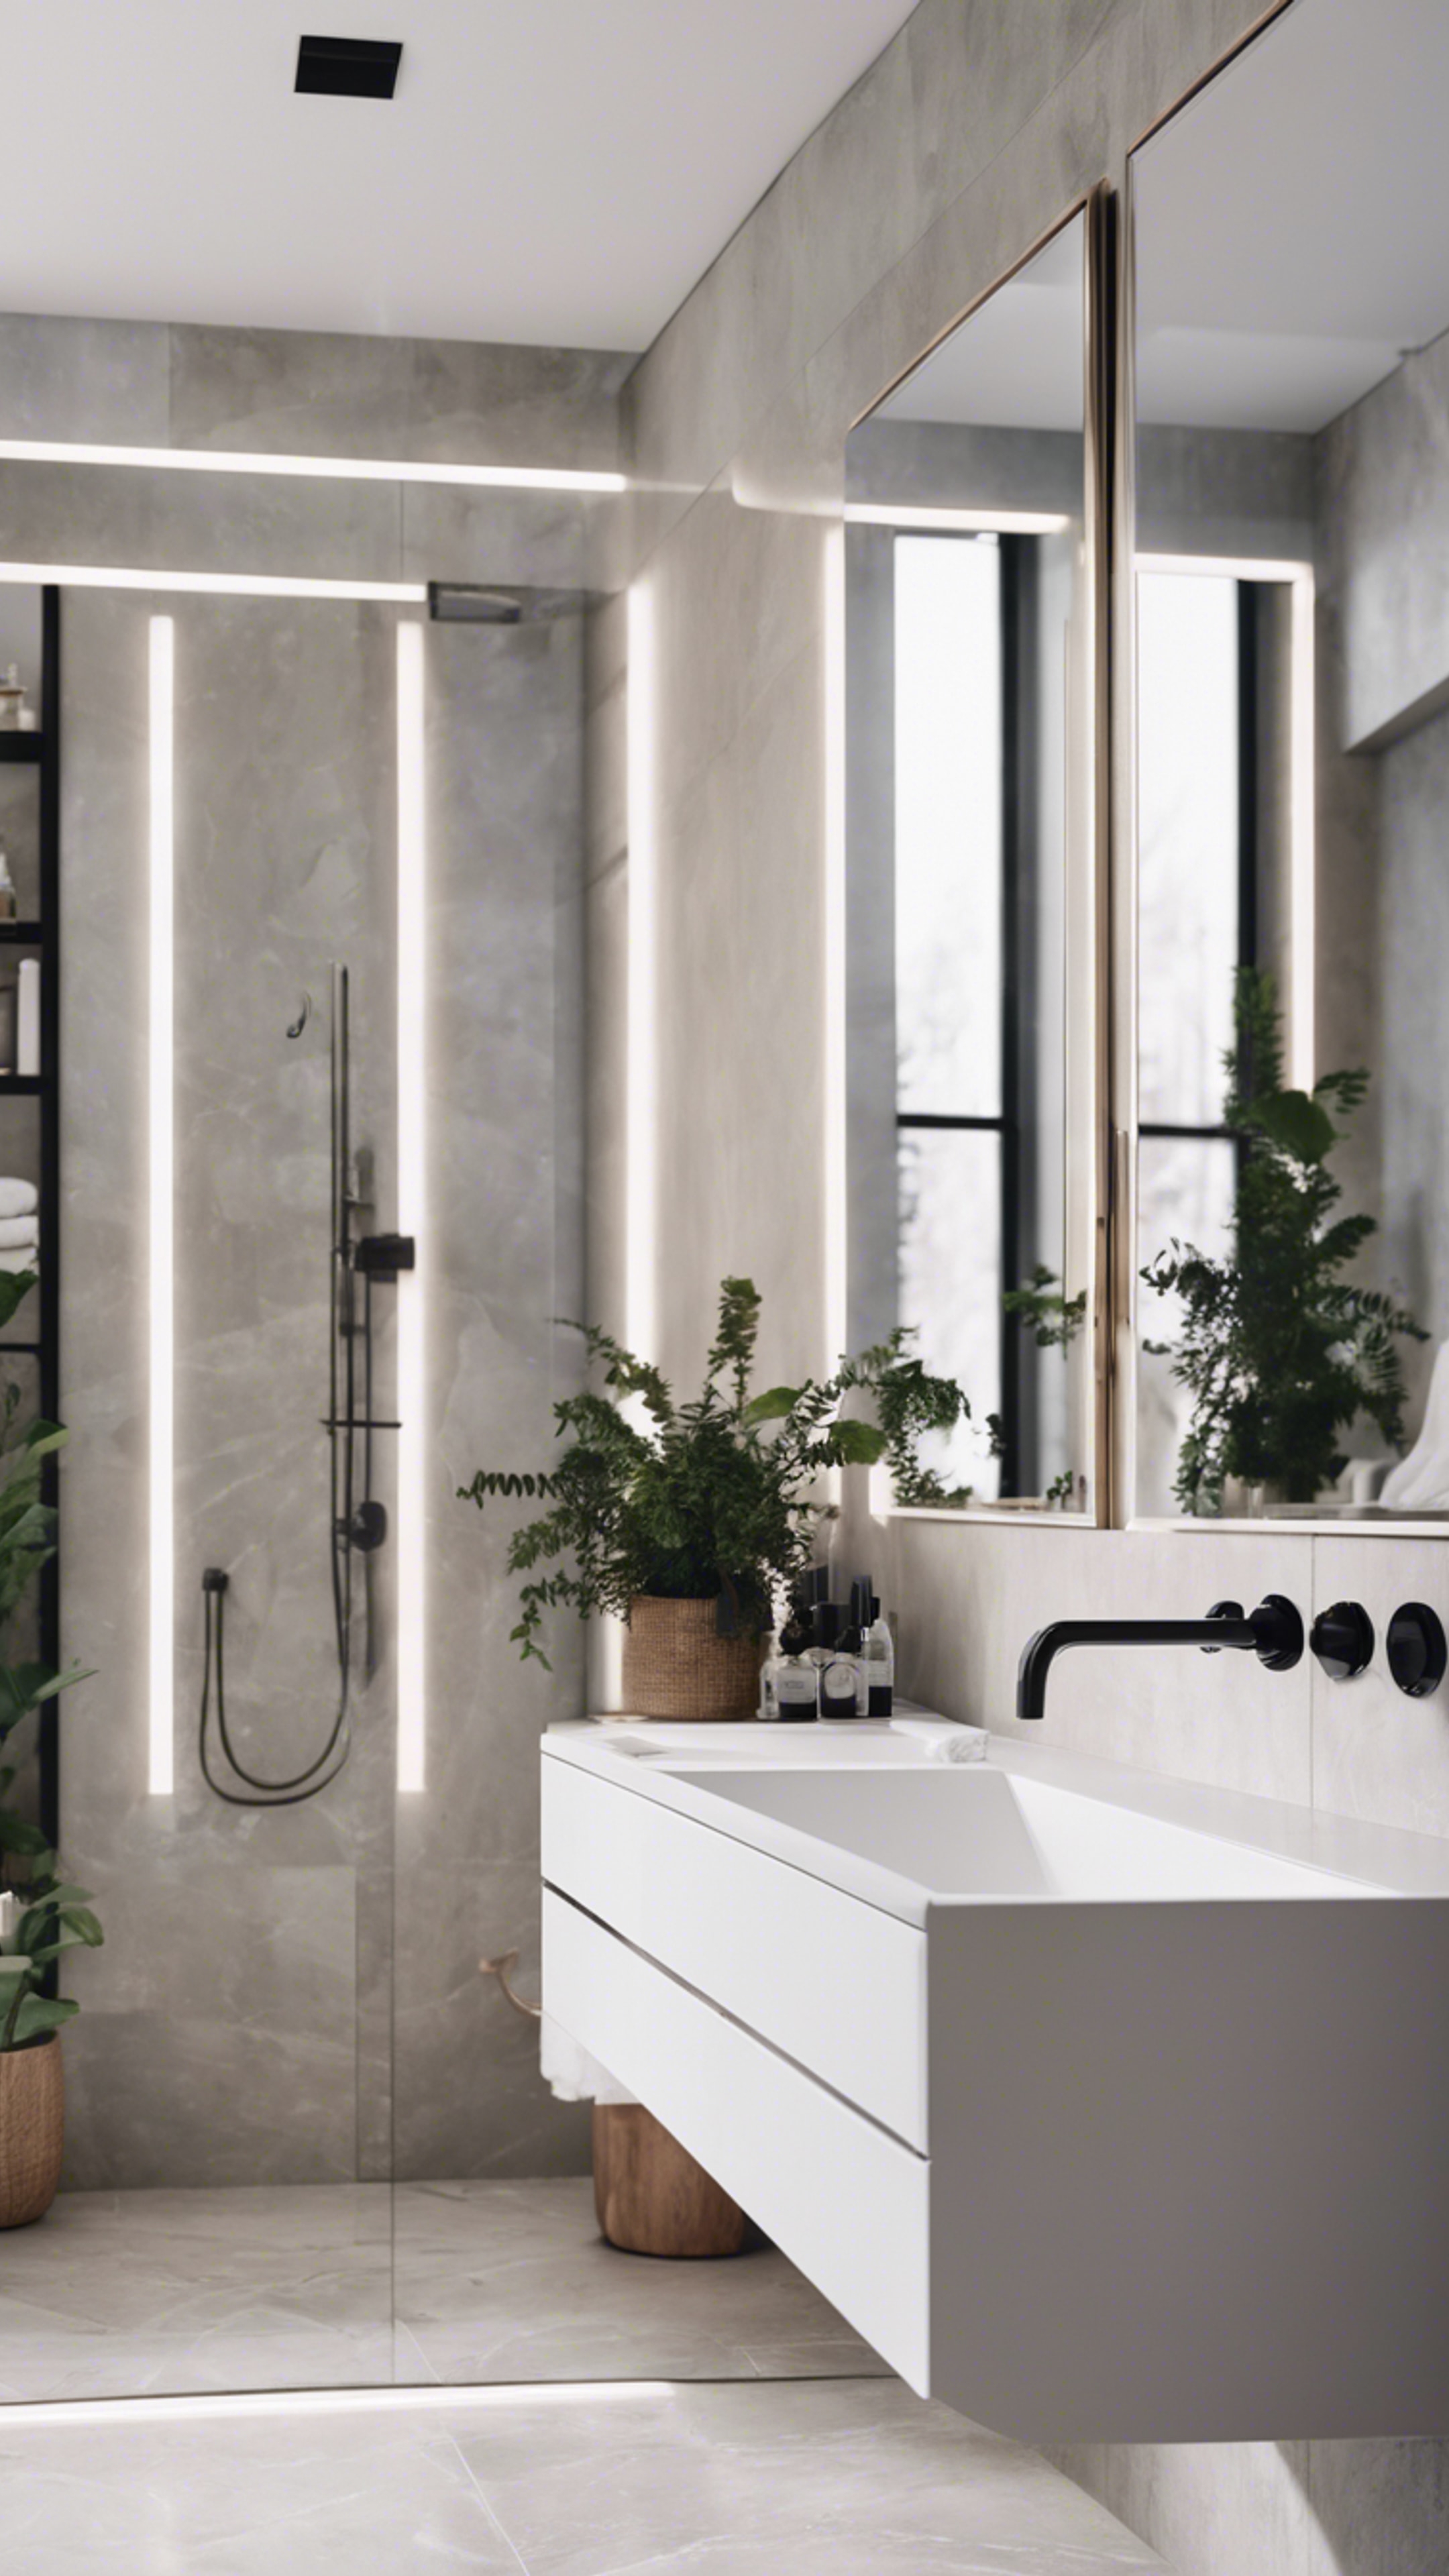 A modern minimalist bathroom with a large frameless mirror and white walls. Wallpaper[5fa422fa129a4ce6a43b]